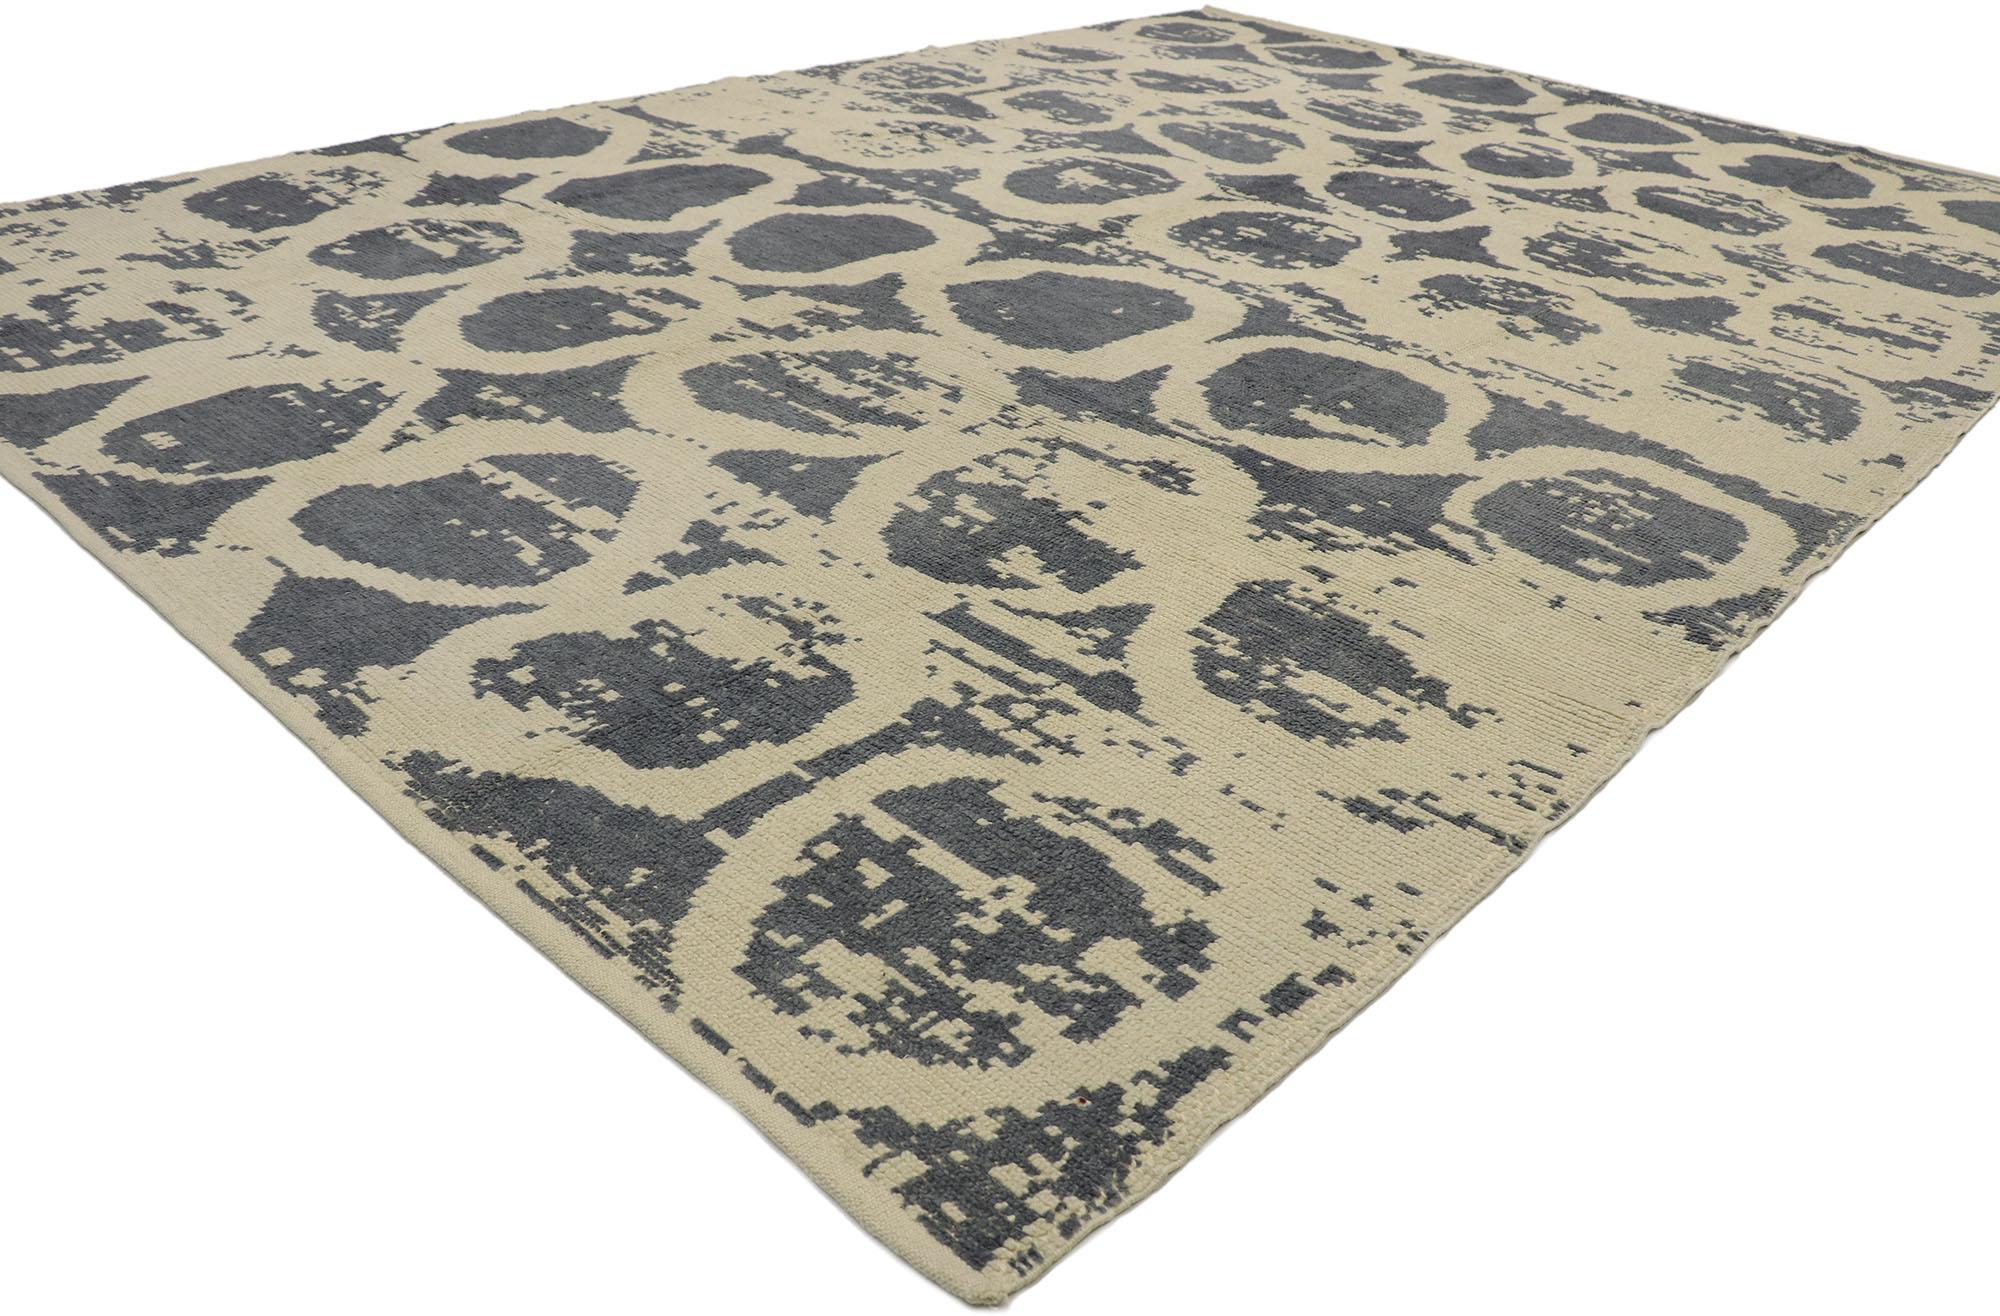 53189, new contemporary Moroccan style Area rug with Abstract Orphism. Drawing inspiration from Wassily Kandinsky and Sonia Delaunay, this hand knotted wool contemporary Moroccan style area rug beautifully embodies abstract Orphism. The abrashed